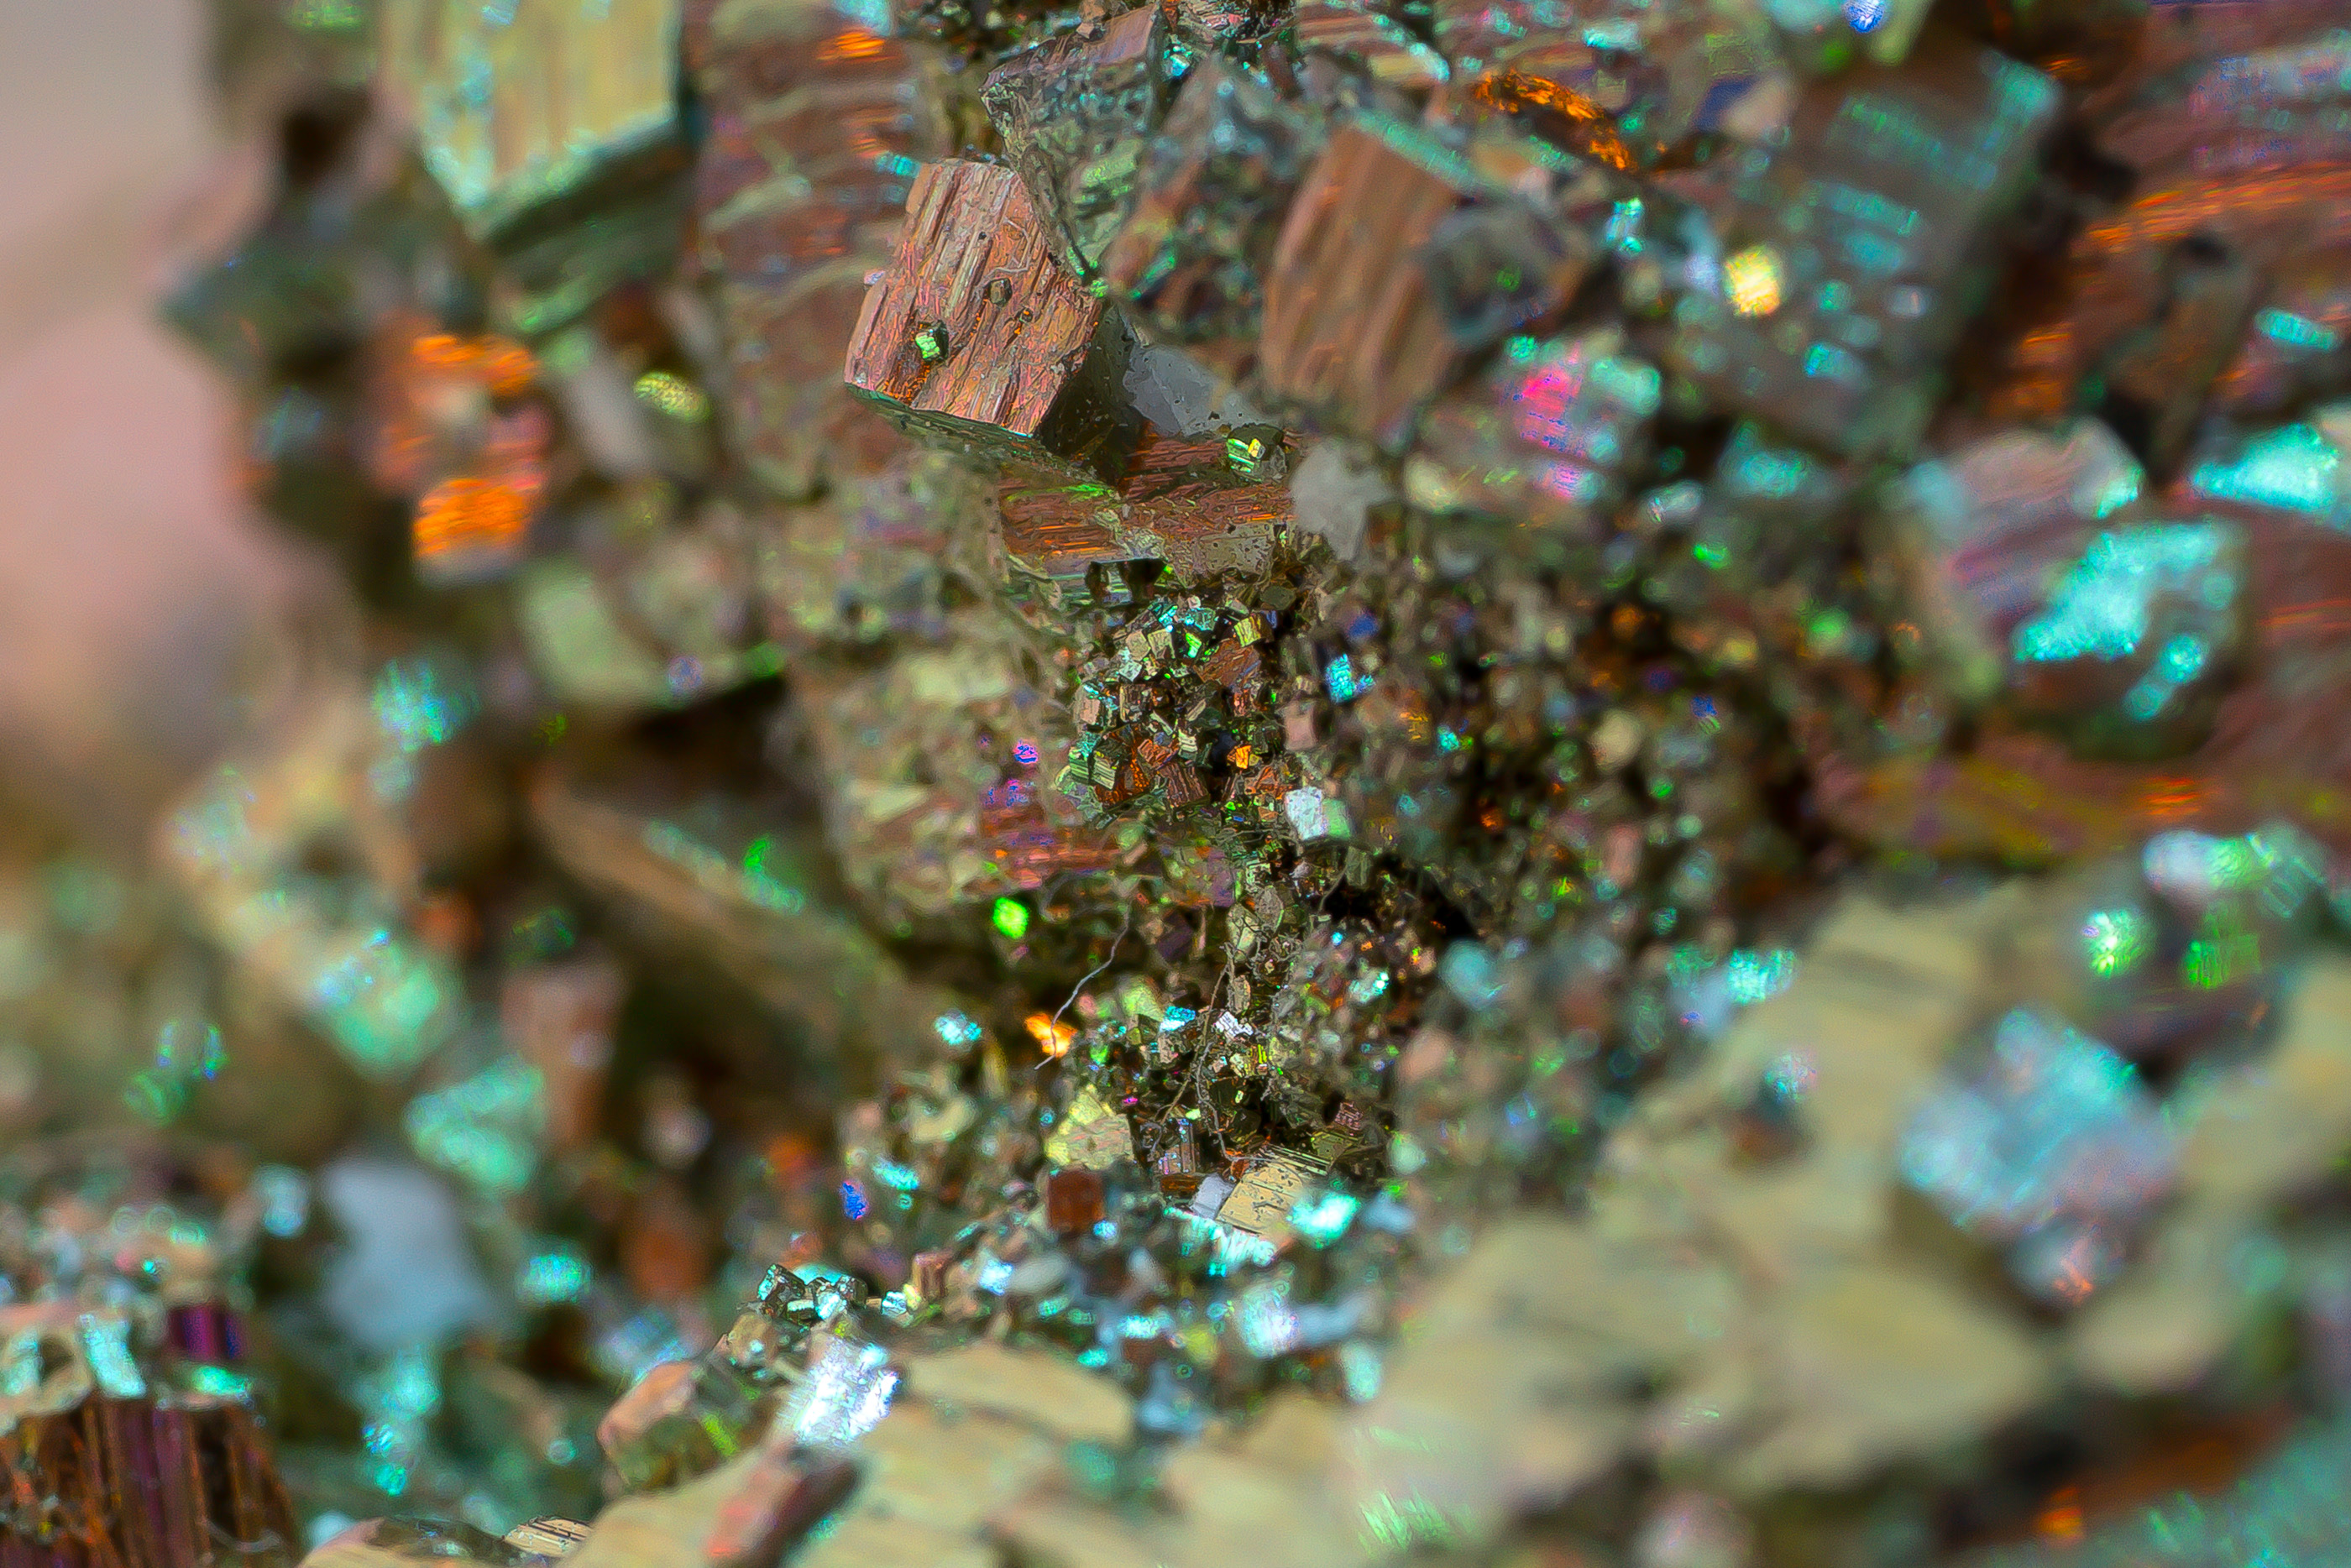 First material. Iridescent Metal. New materials. Colorful Metal. New material photo.